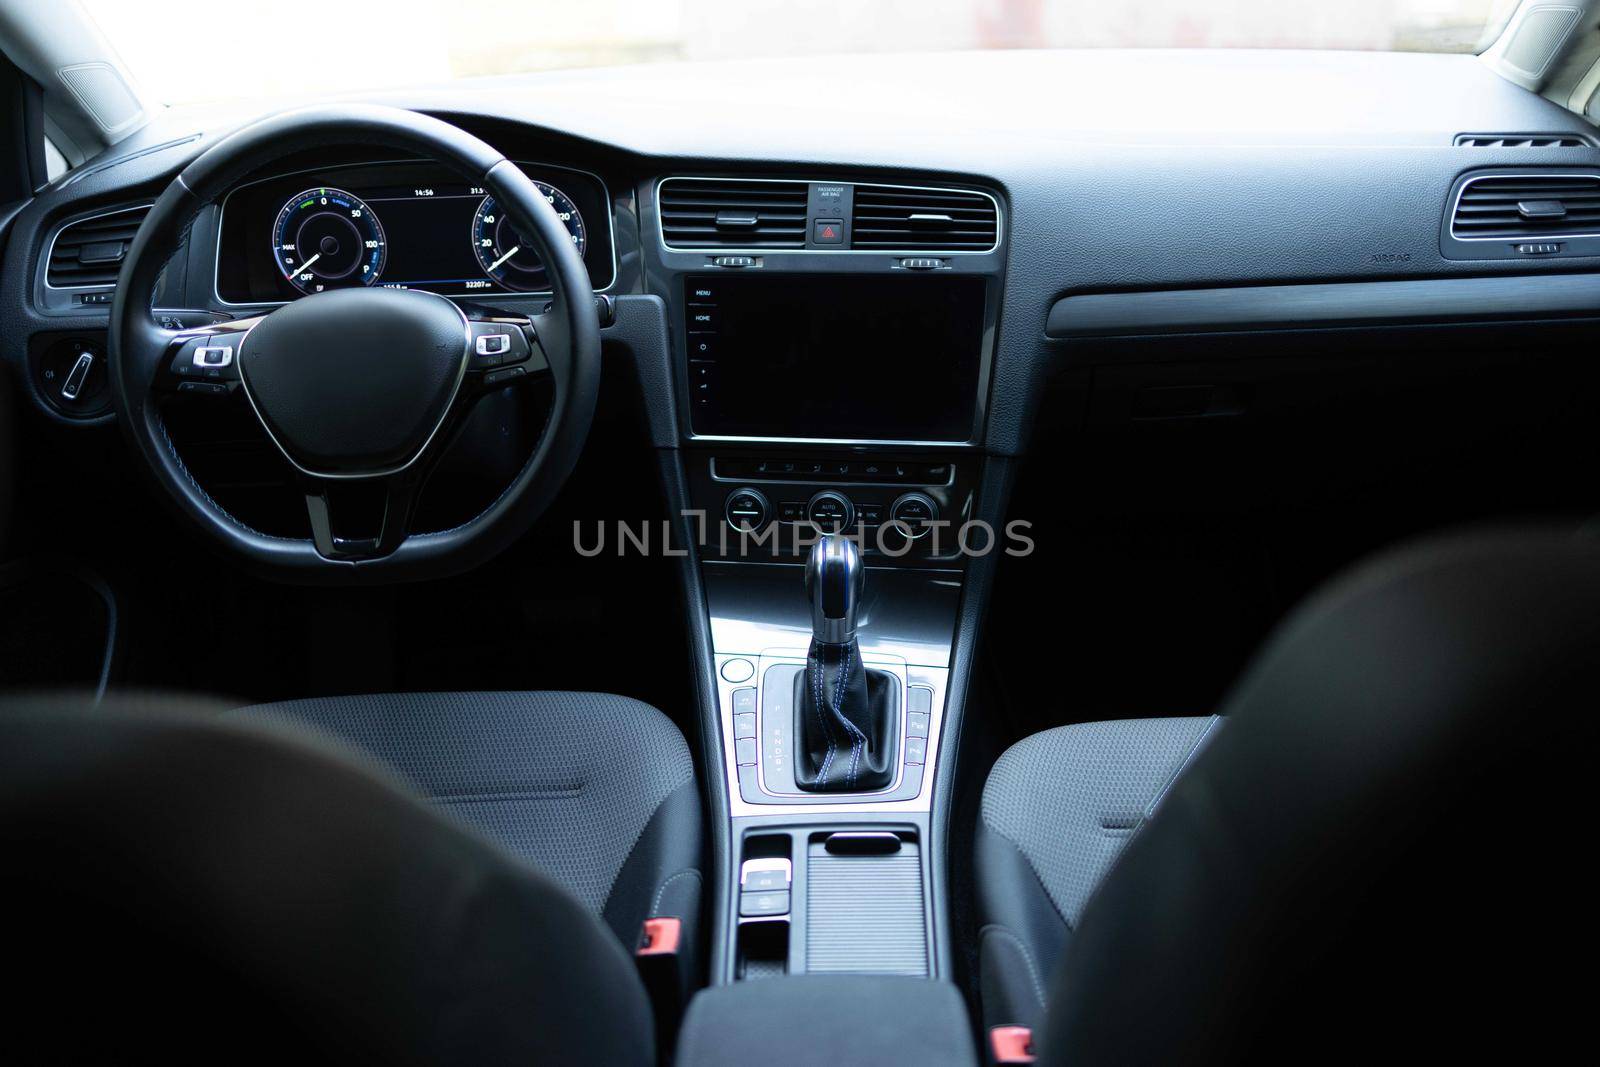 Electric car interior details adjustments. Inside car interior with front seats, driver and passenger, textile, windows, console, gear shift, electric buttons, digital speedometer by uflypro